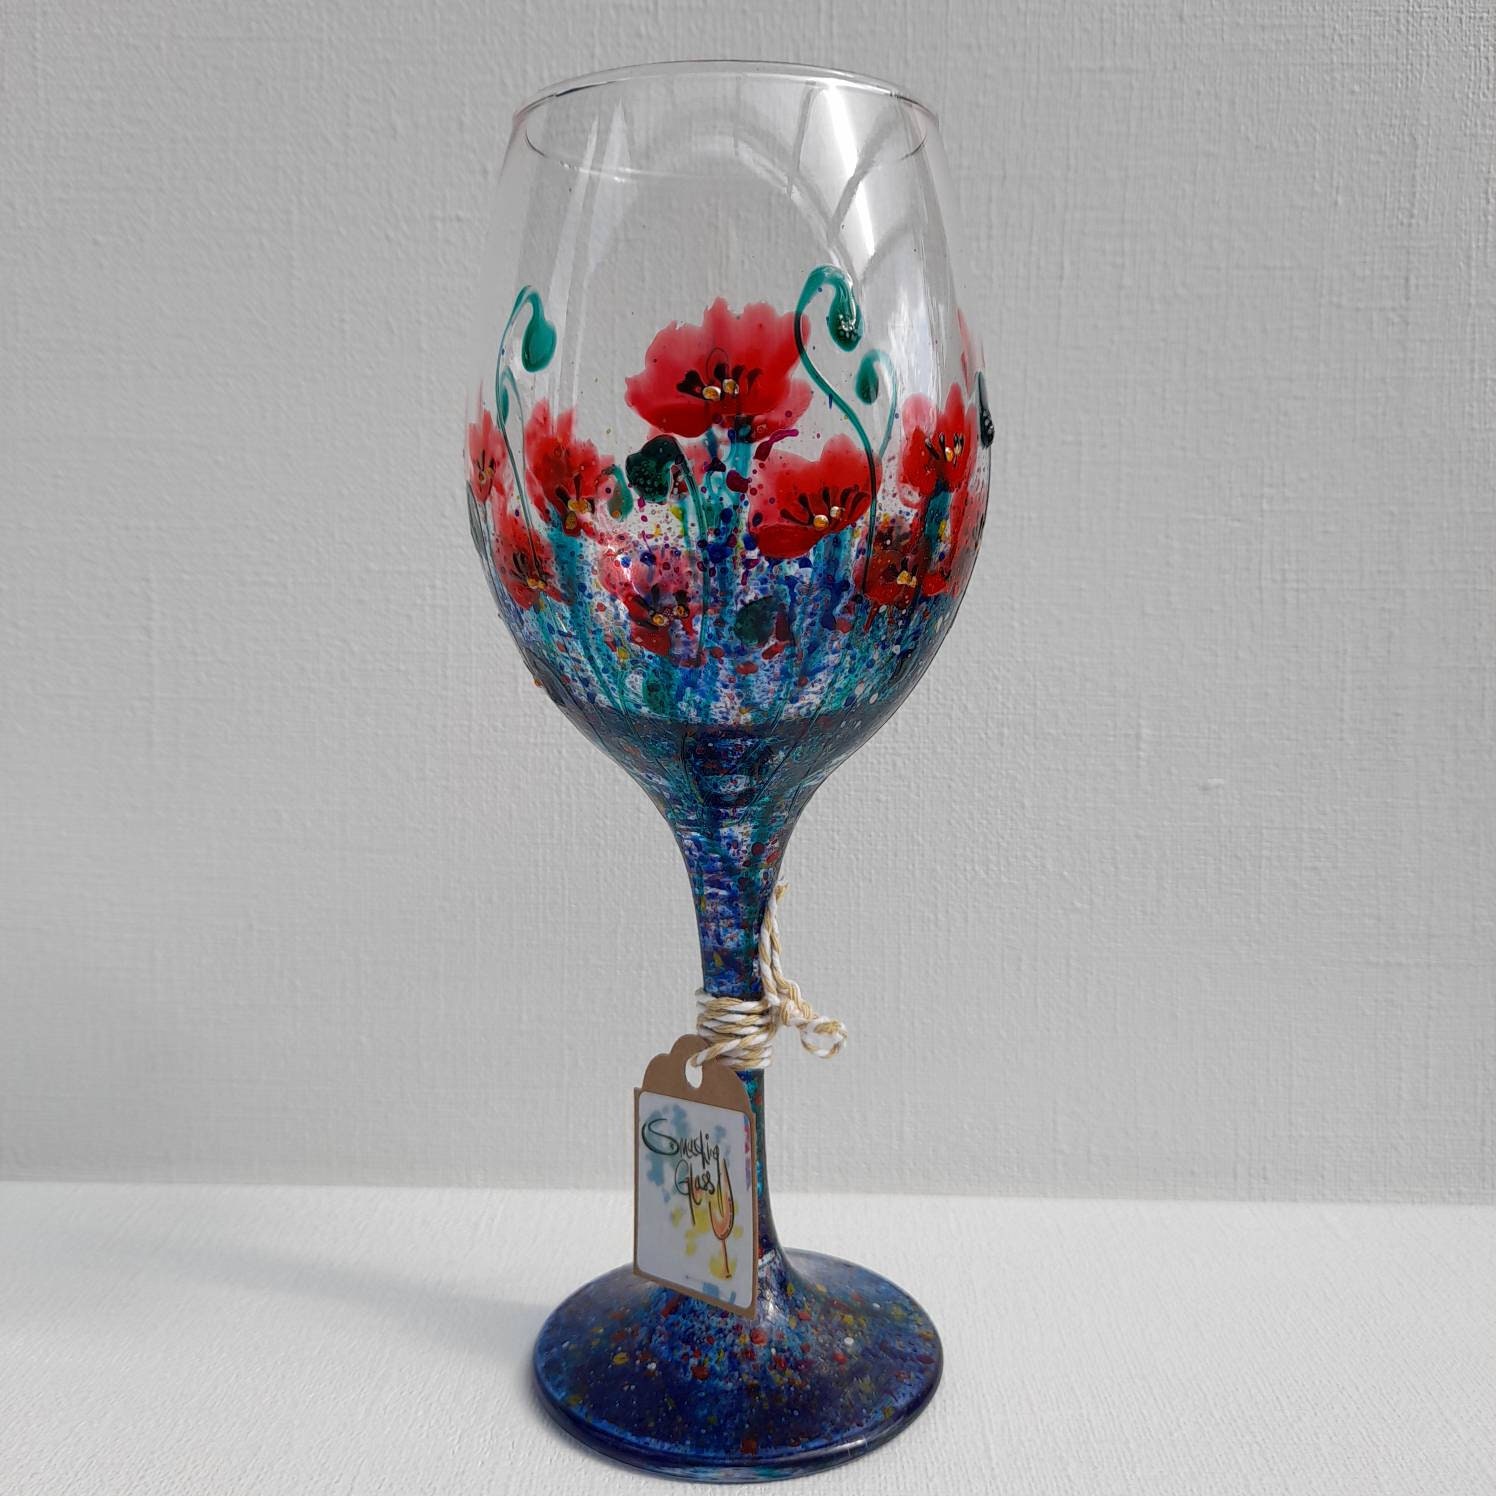 1 Party Cup Hand Blown Glass Cup, Cane, Murrine, Colorful, Playful, Set of  Glasses, Wine Glass, Great Gift Idea, Unique, Price per Glass 